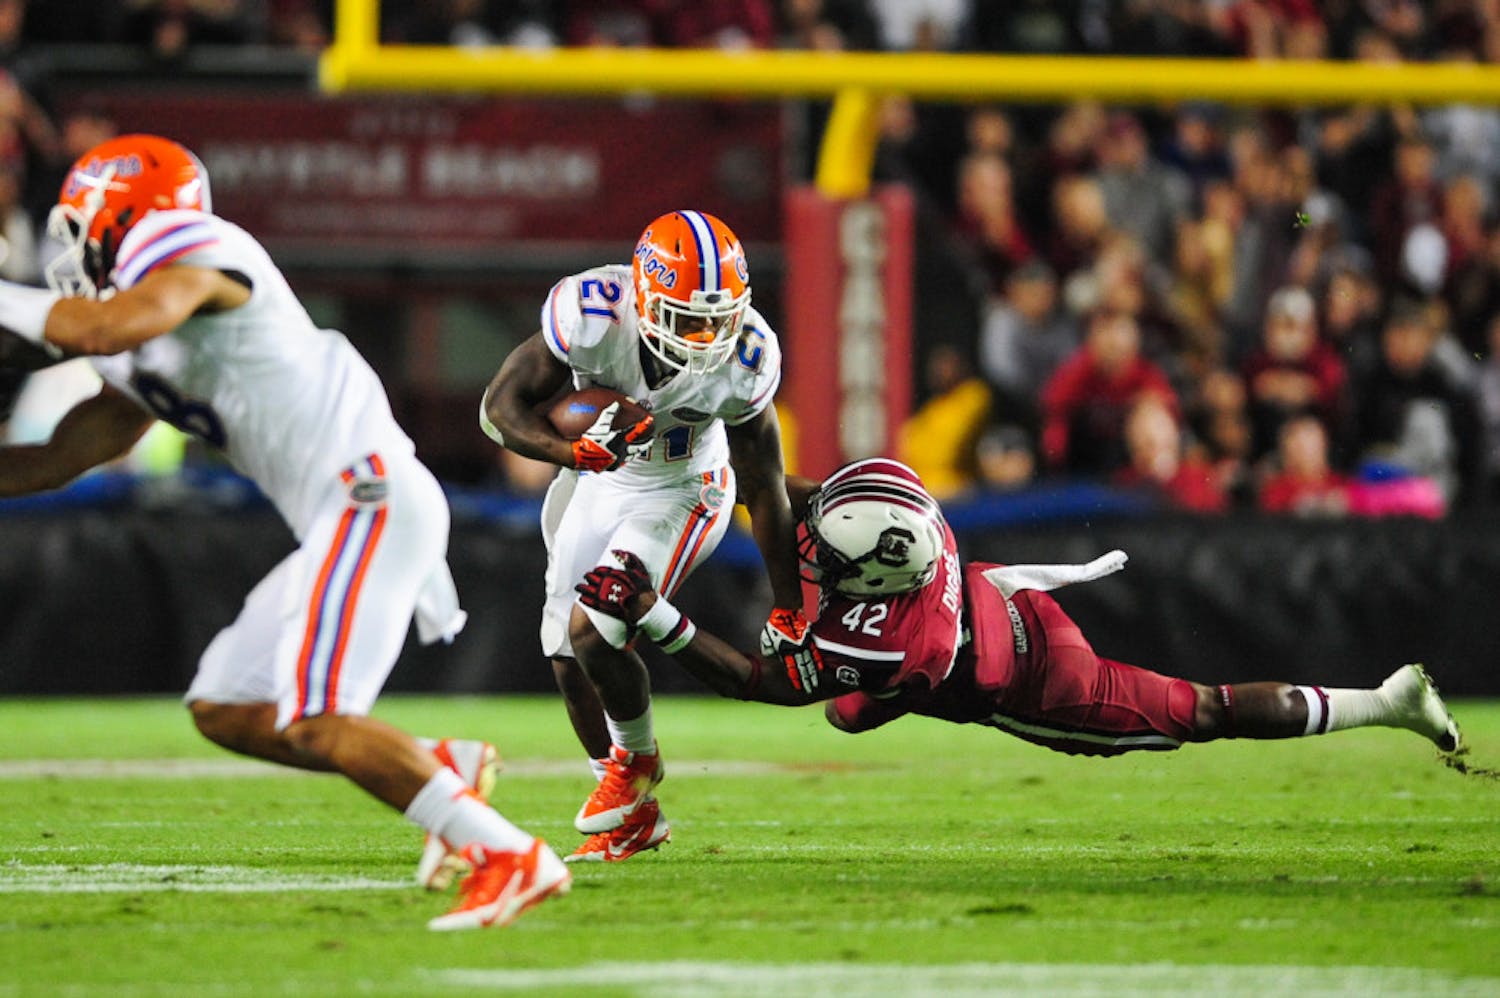 Freshman running back Kelvin Taylor tries to escape a tackle during Florida's 19-14 loss to No. 10 South Carolina on Saturday night at Williams-Brice Stadium in Columbia, S.C.